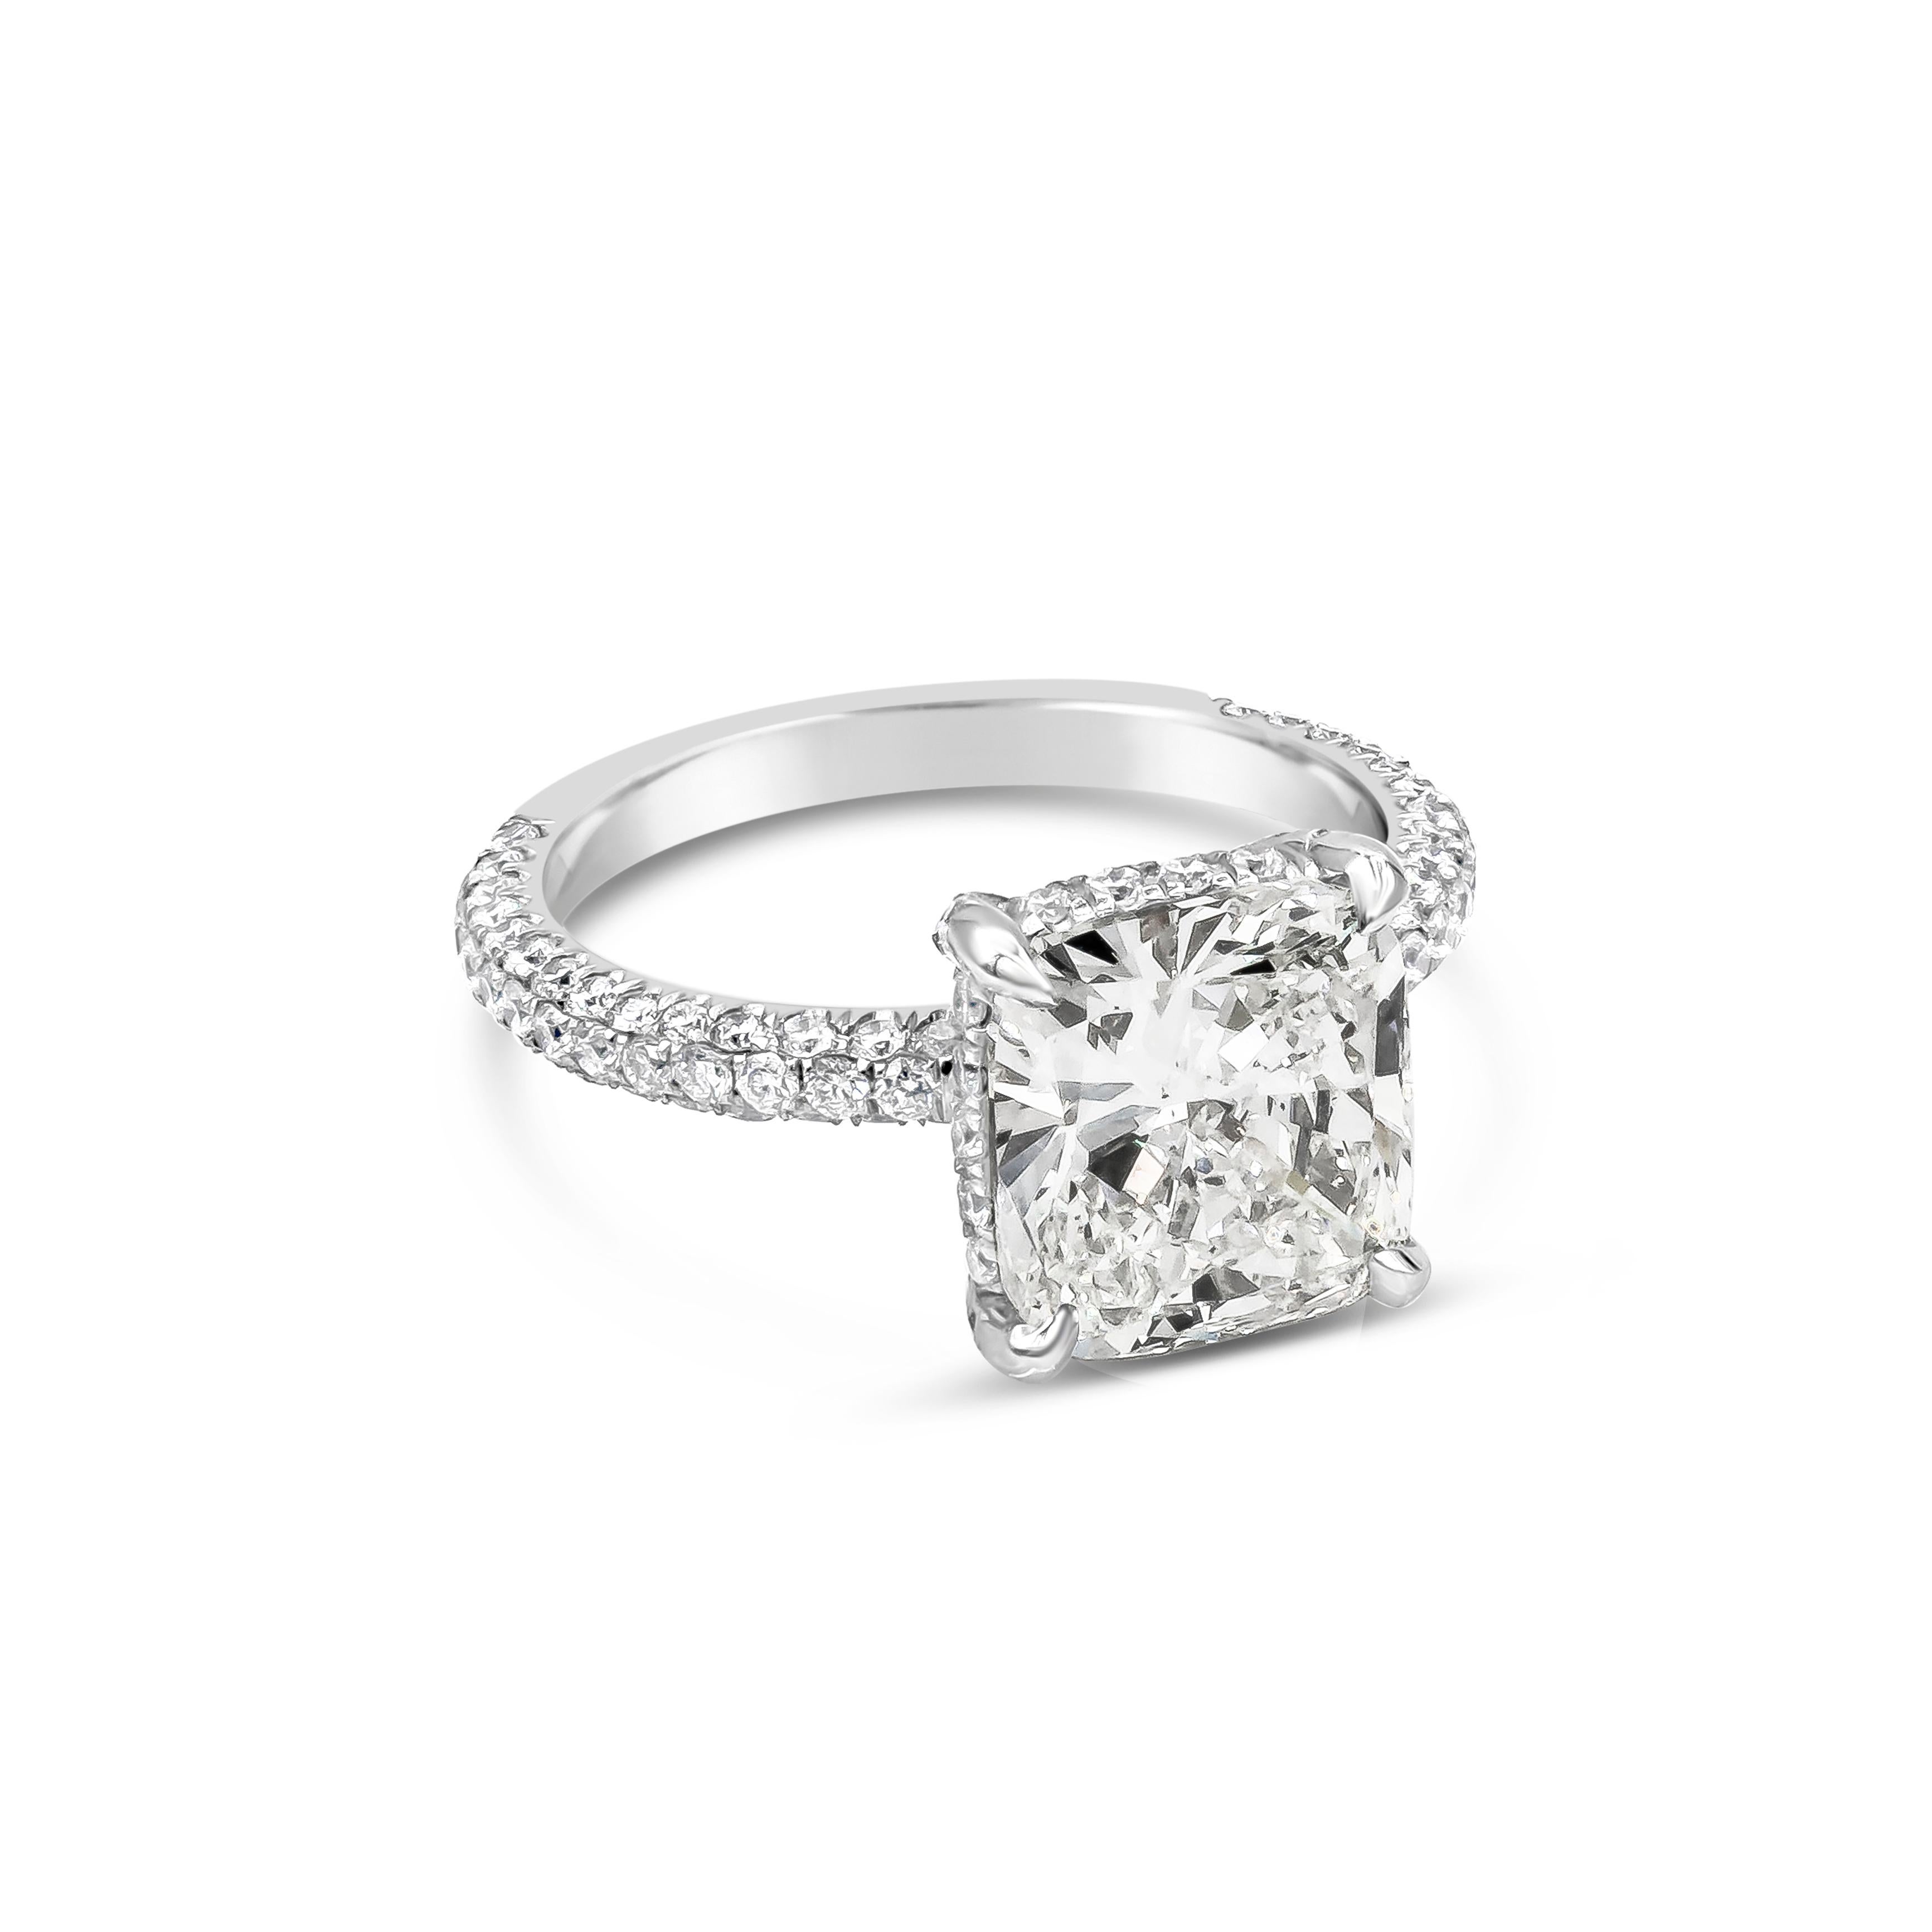 A brilliant engagement ring style showcasing a 3.08 carat cushion cut diamond, certified by GIA as J color, SI2 clarity, set in a diamond-encrusted basket; polished platinum band micro-pave set with round brilliant diamonds. Accent diamonds weigh